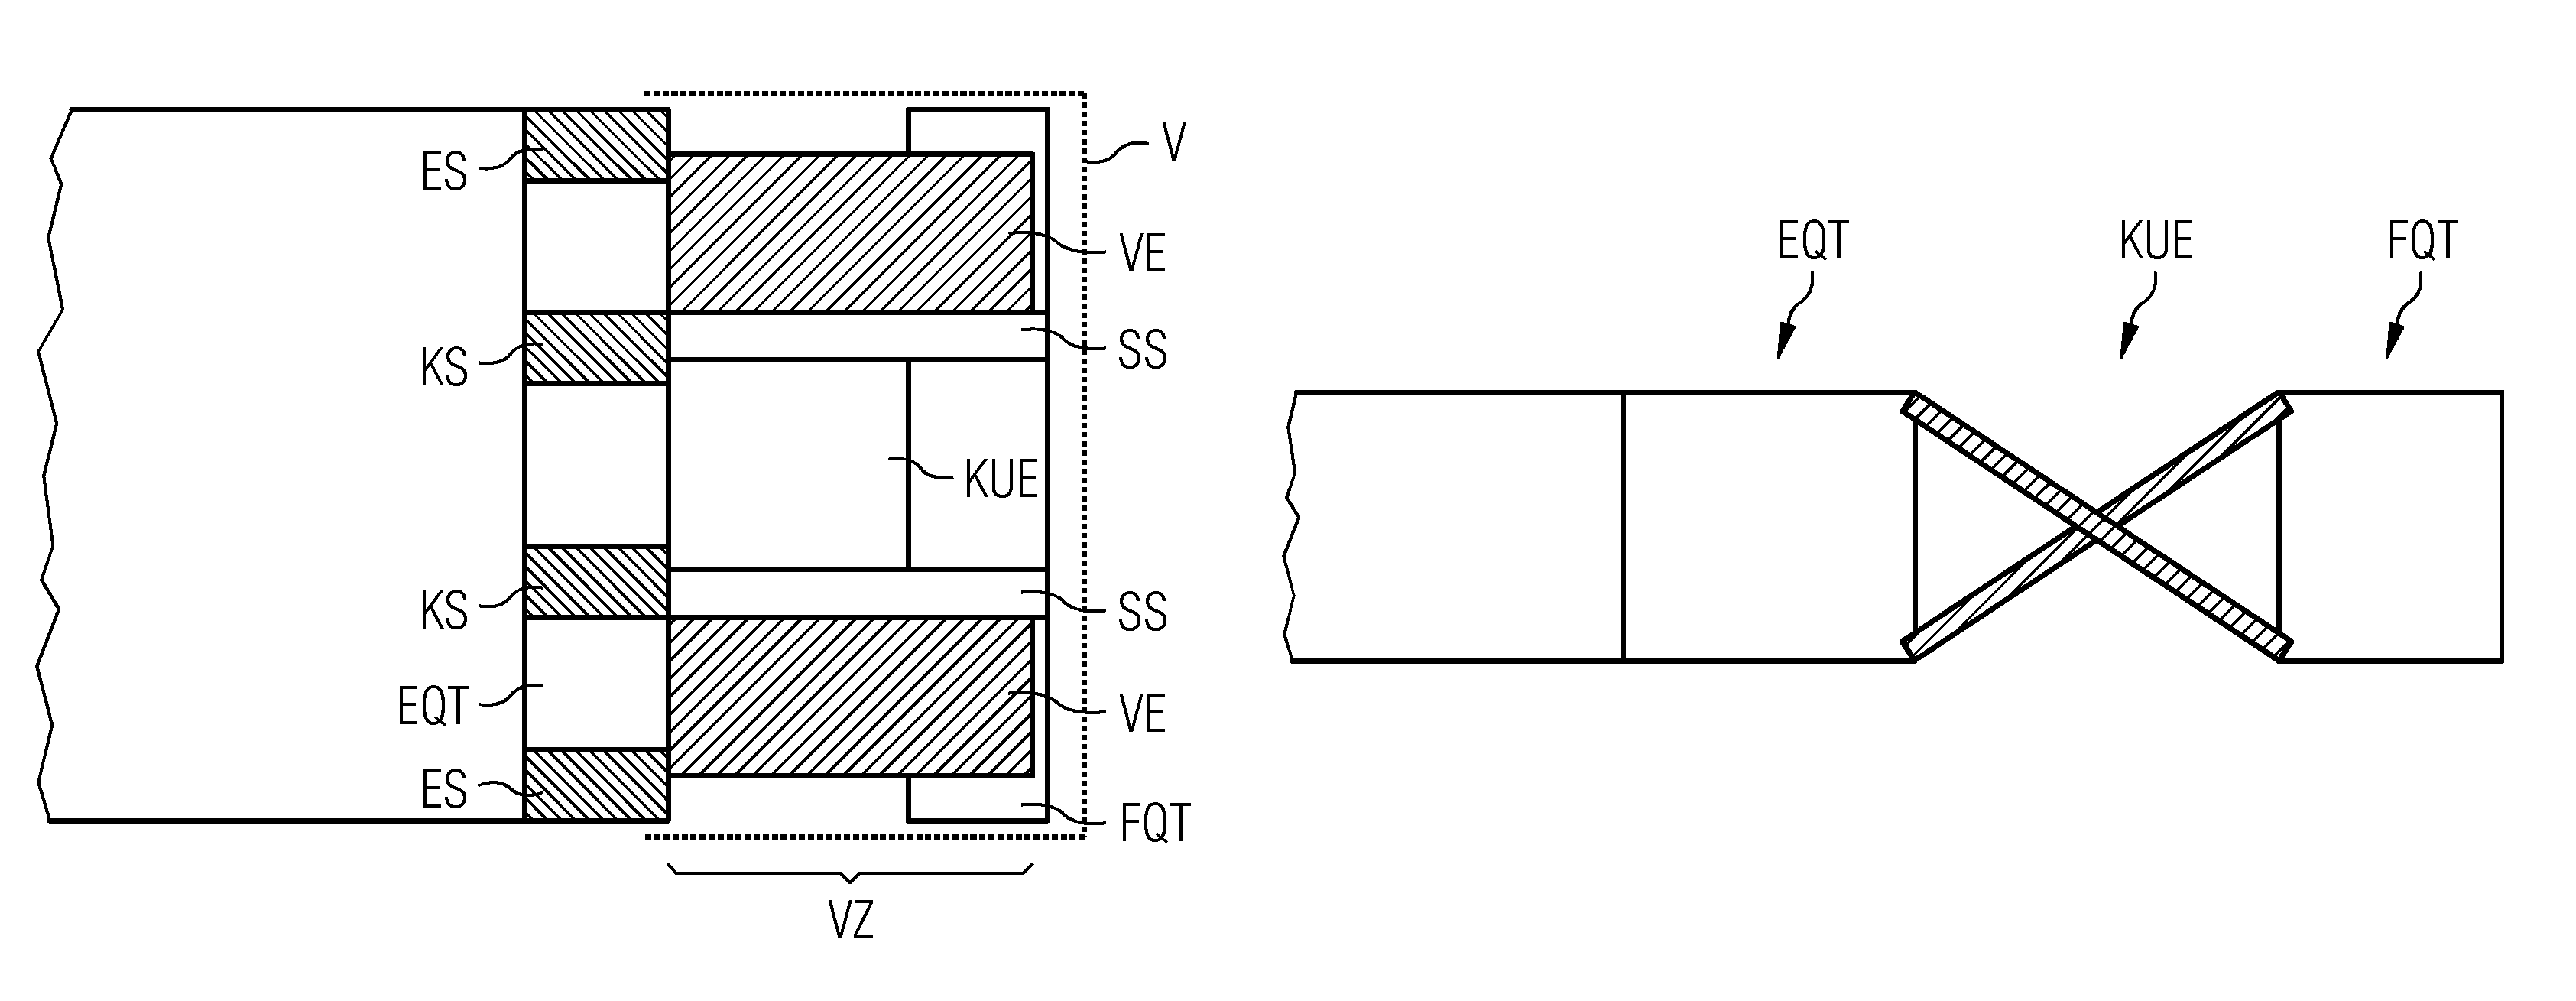 Rail vehicle having an attached deformation zone